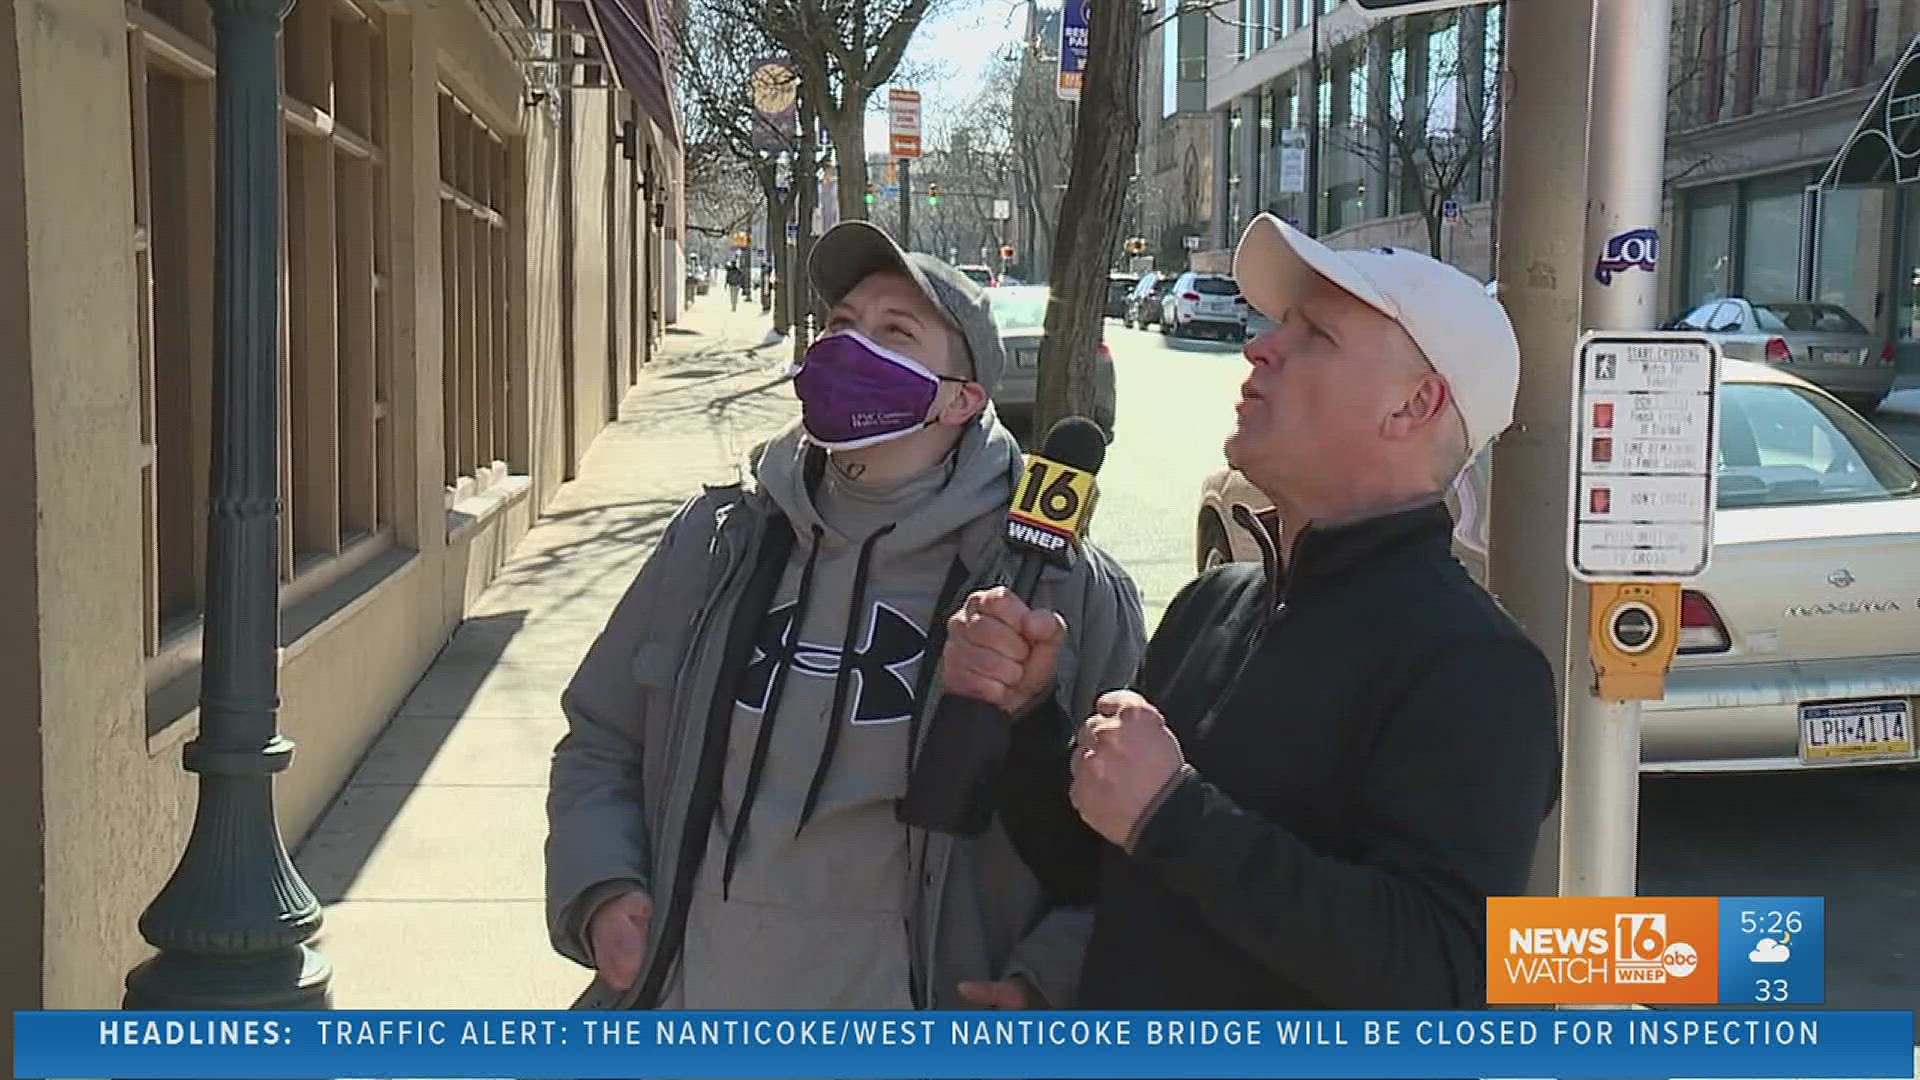 With Saint Patrick's Day parade coming to downtown Scranton, Joe's thinking all things Irish in this week's Wham Cam. He wants to know what Doggerland is.